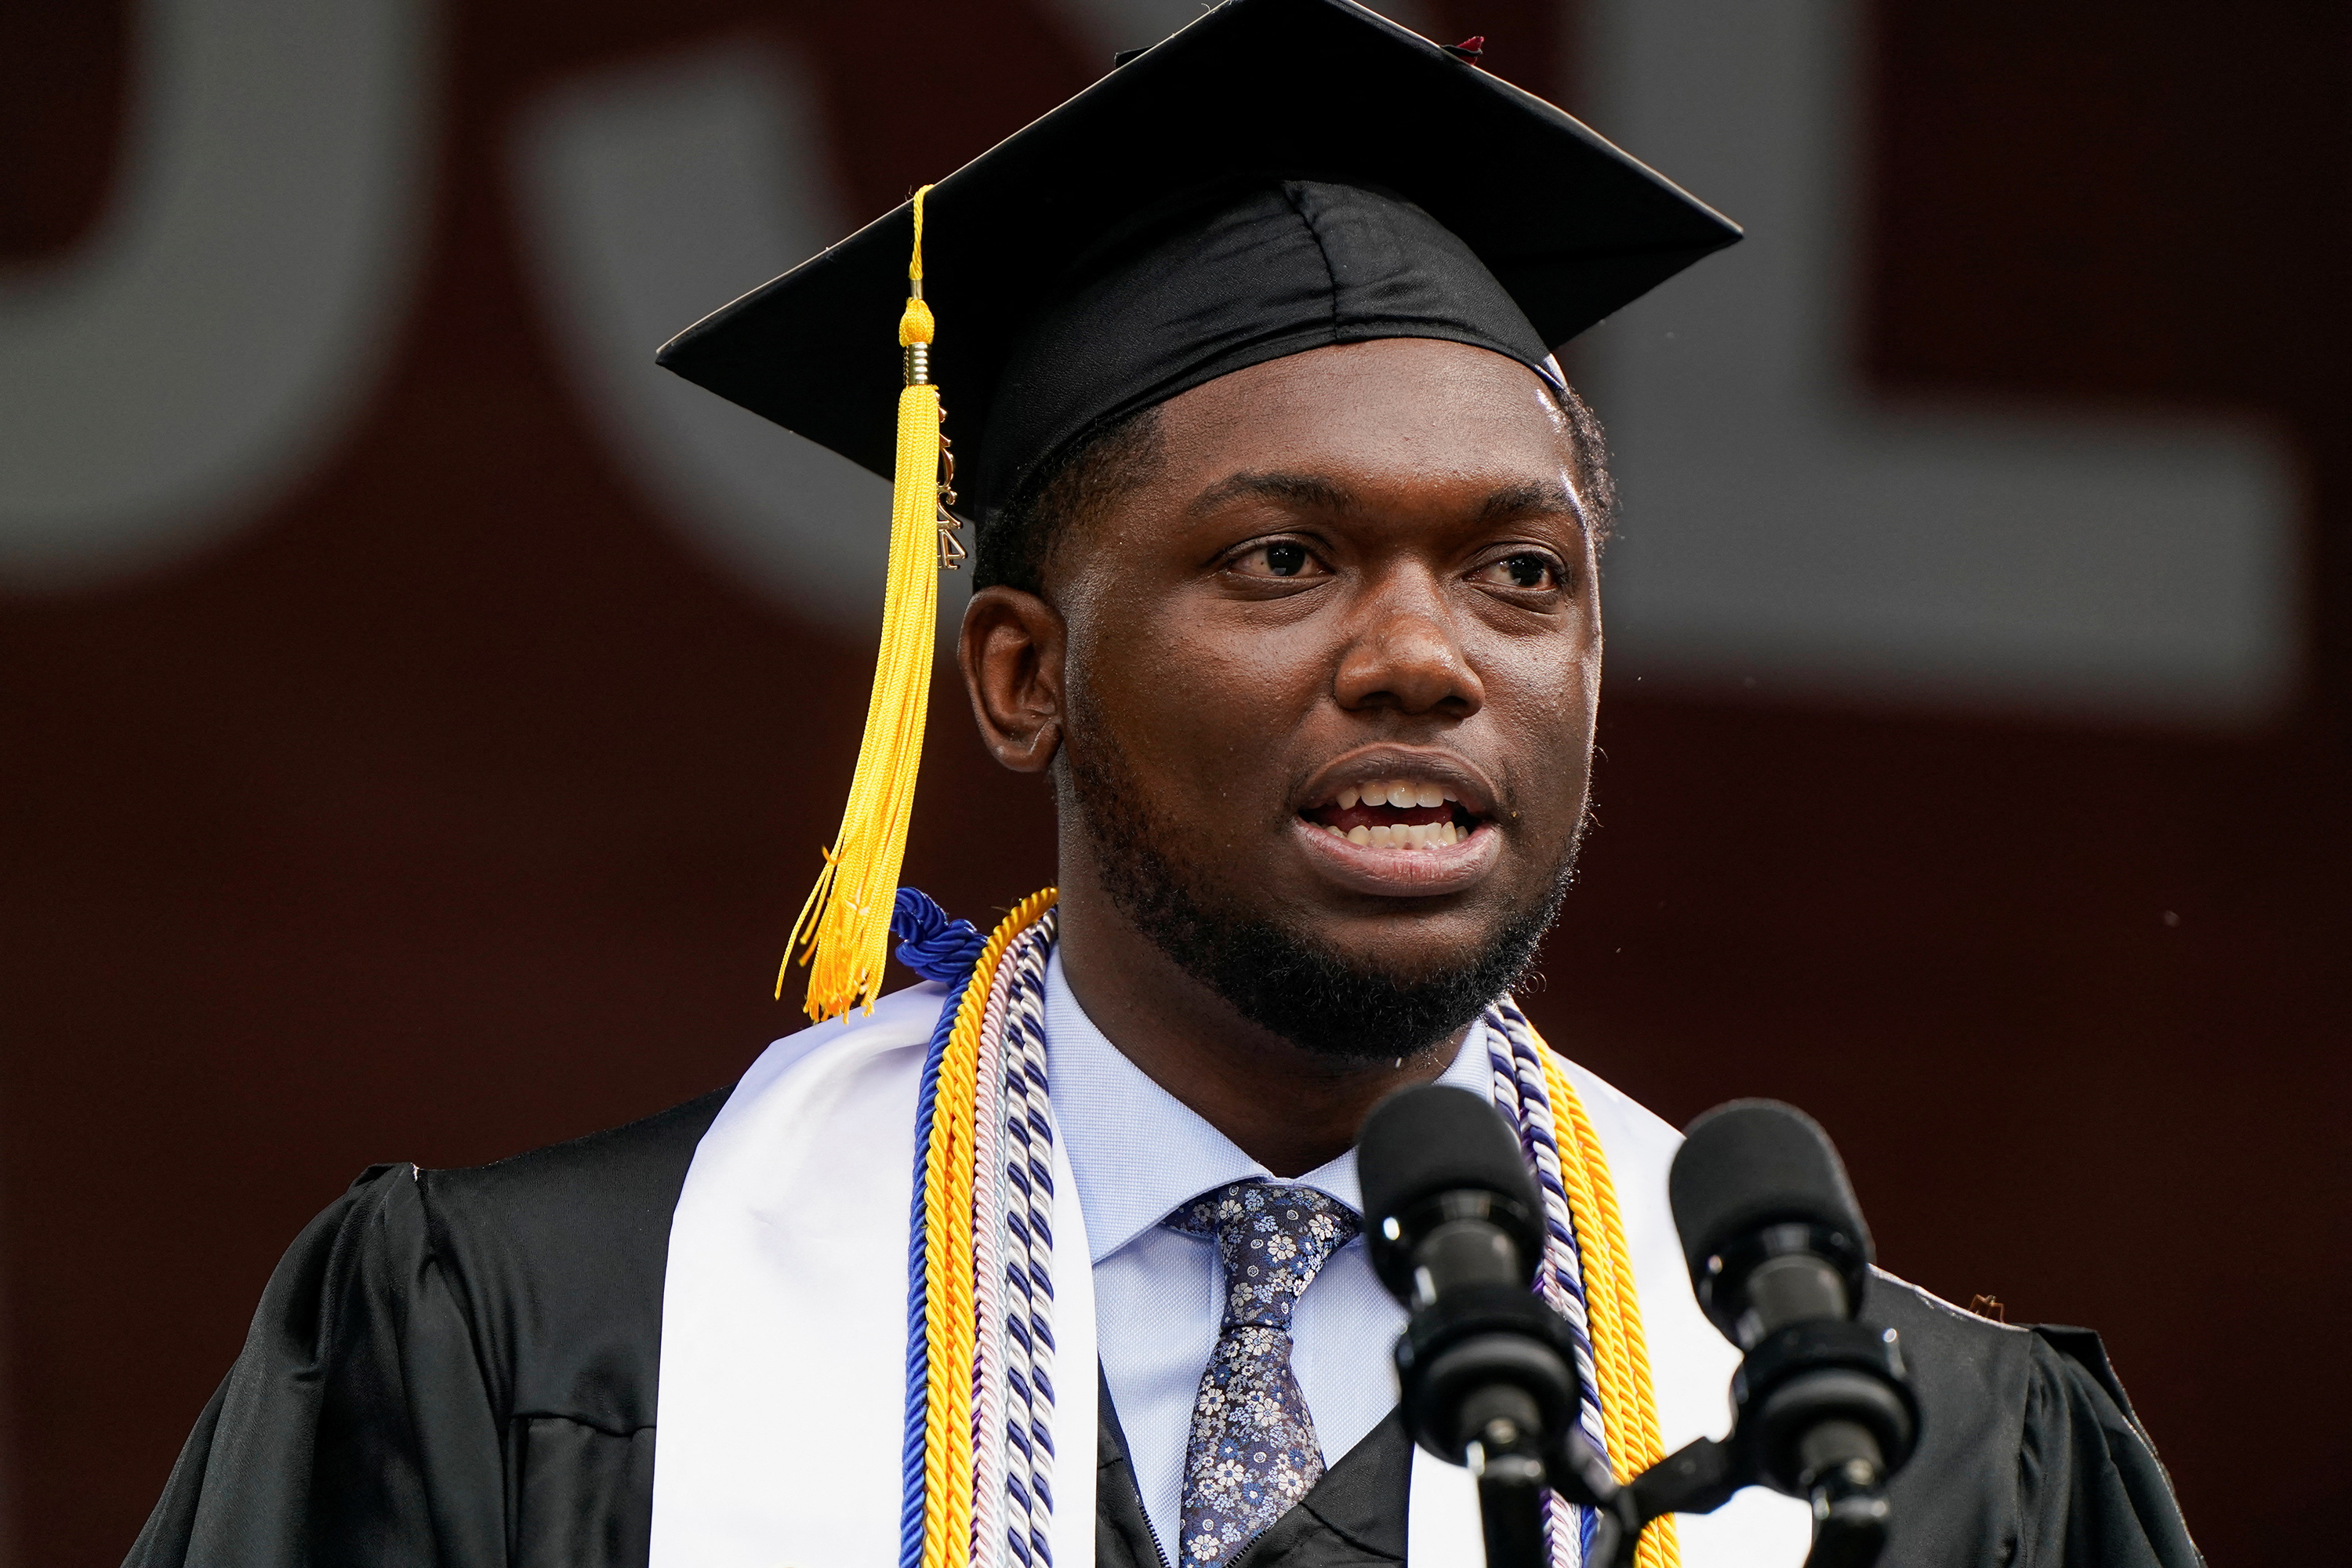 Morehouse College valedictorian DeAngelo Fletcher speaks during the commencement in Atlanta on May 19.